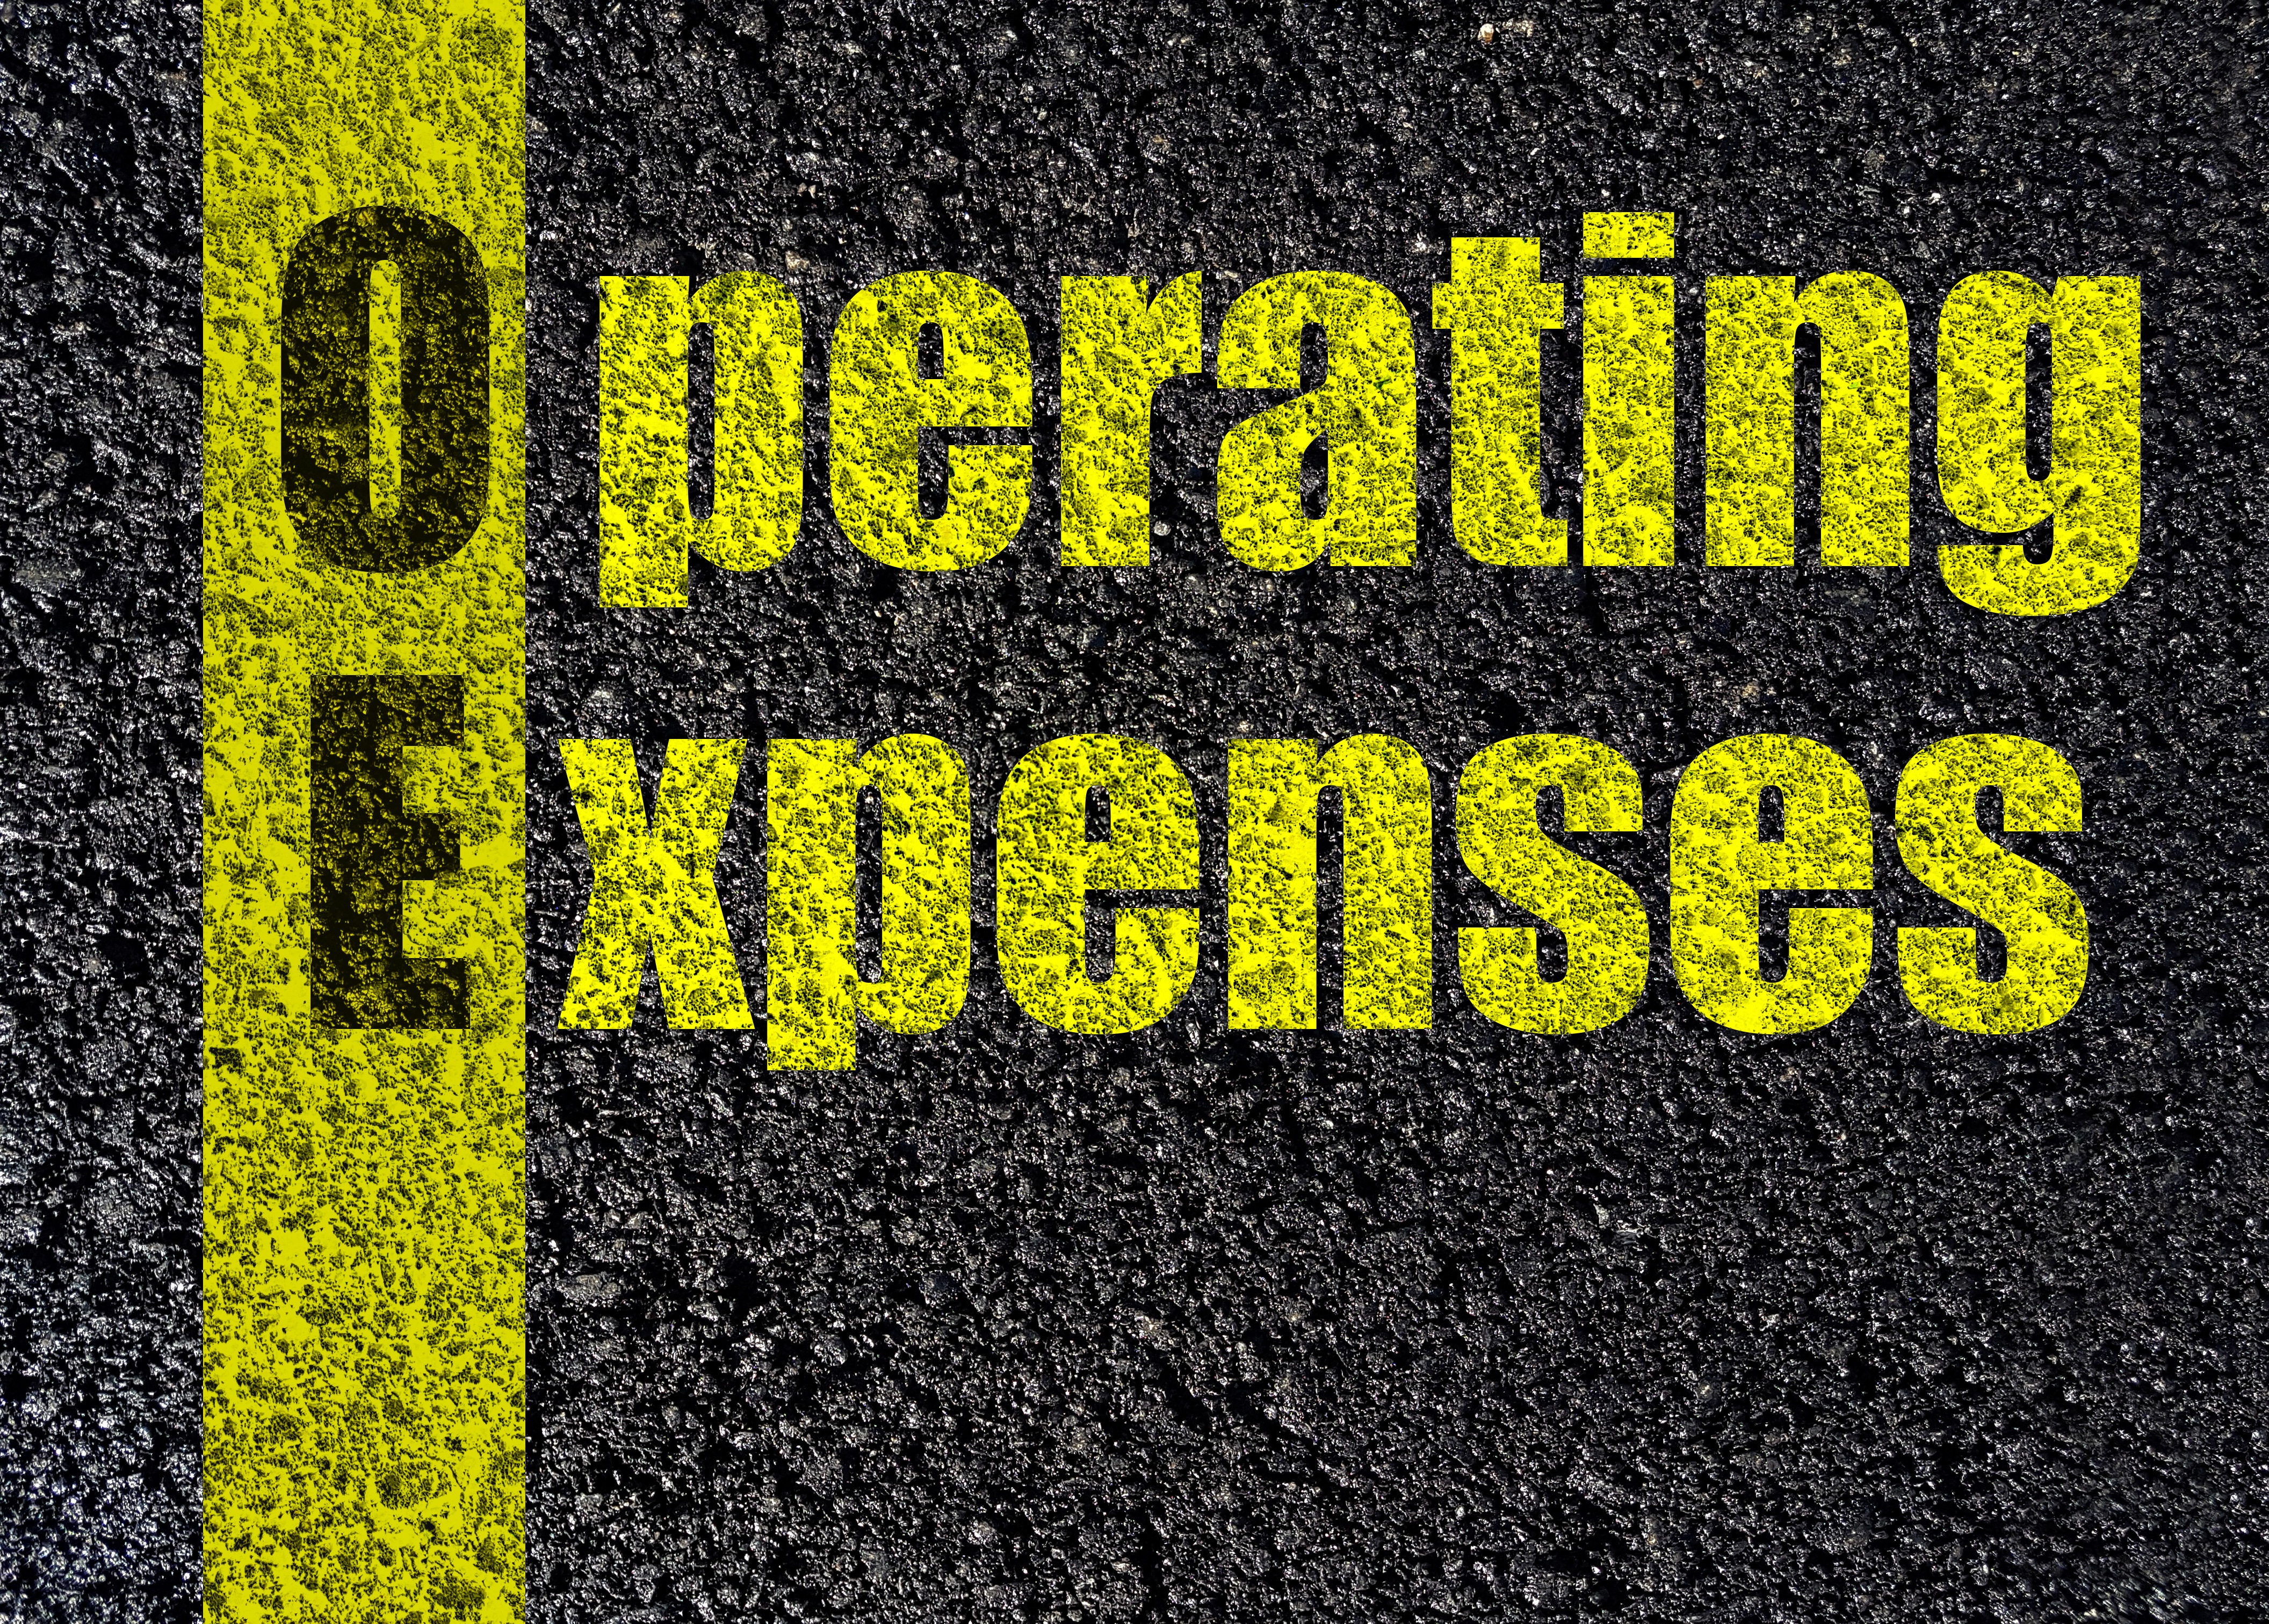 operating expenses